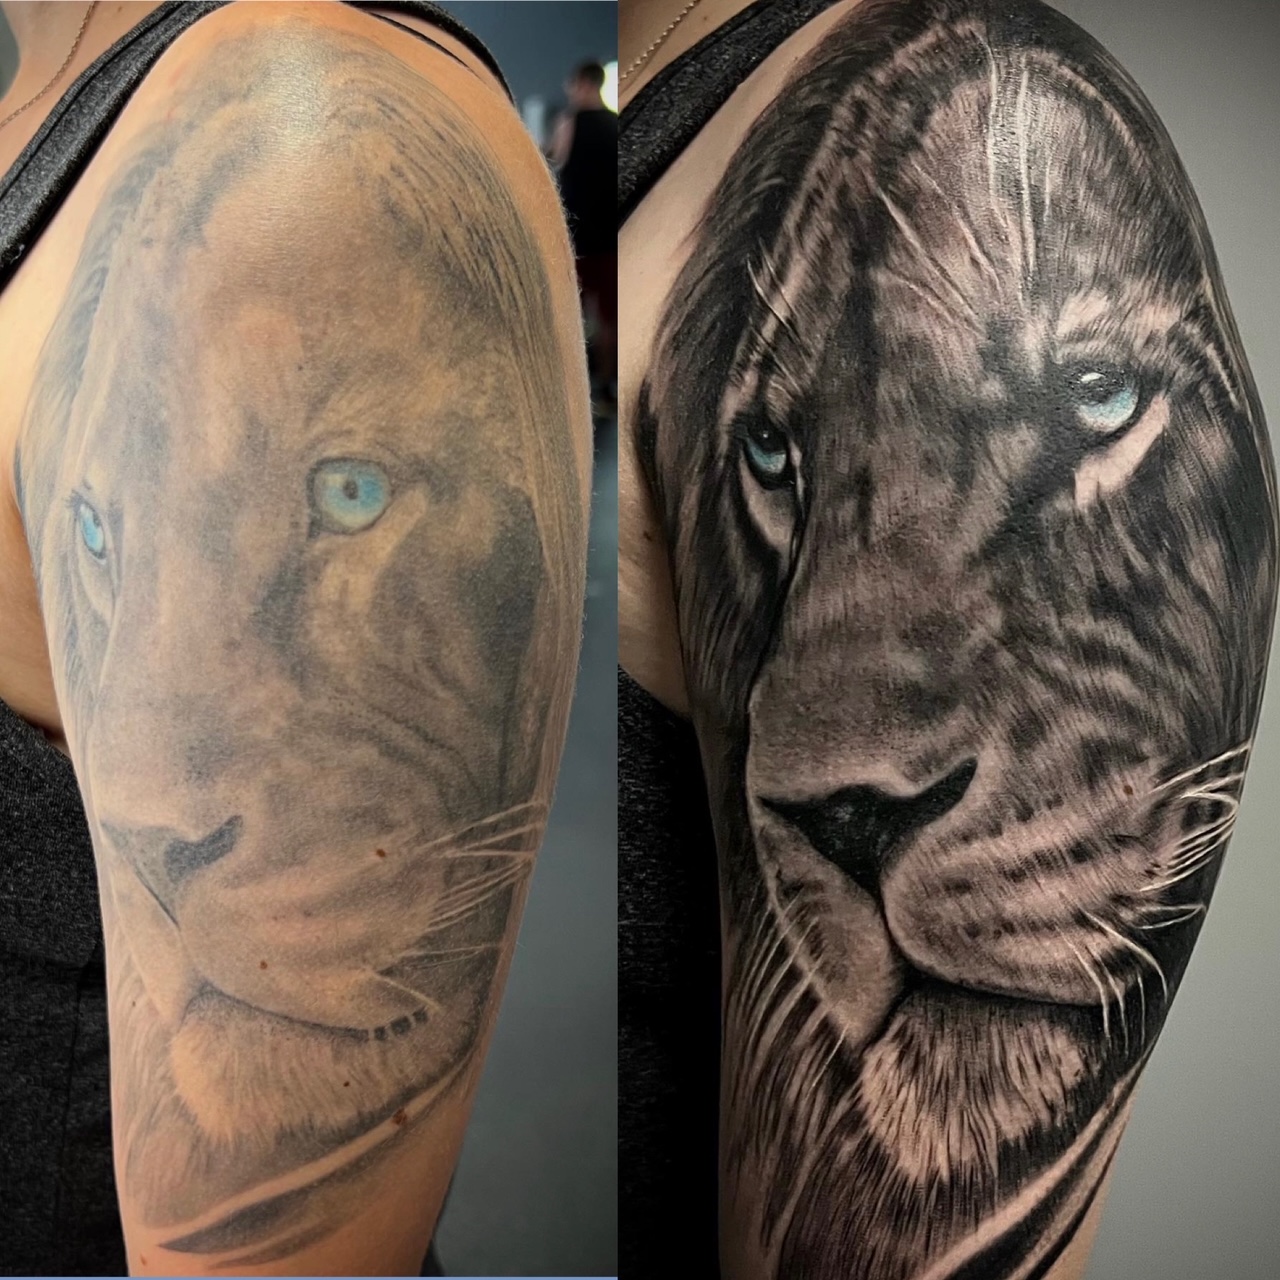 TRILL INK TATTOOS on Twitter Black panther covered up alot of visible  scars blackpanther blackpanthertattoo trillinktattoos  httpstcoqlXWvGq7g6  Twitter